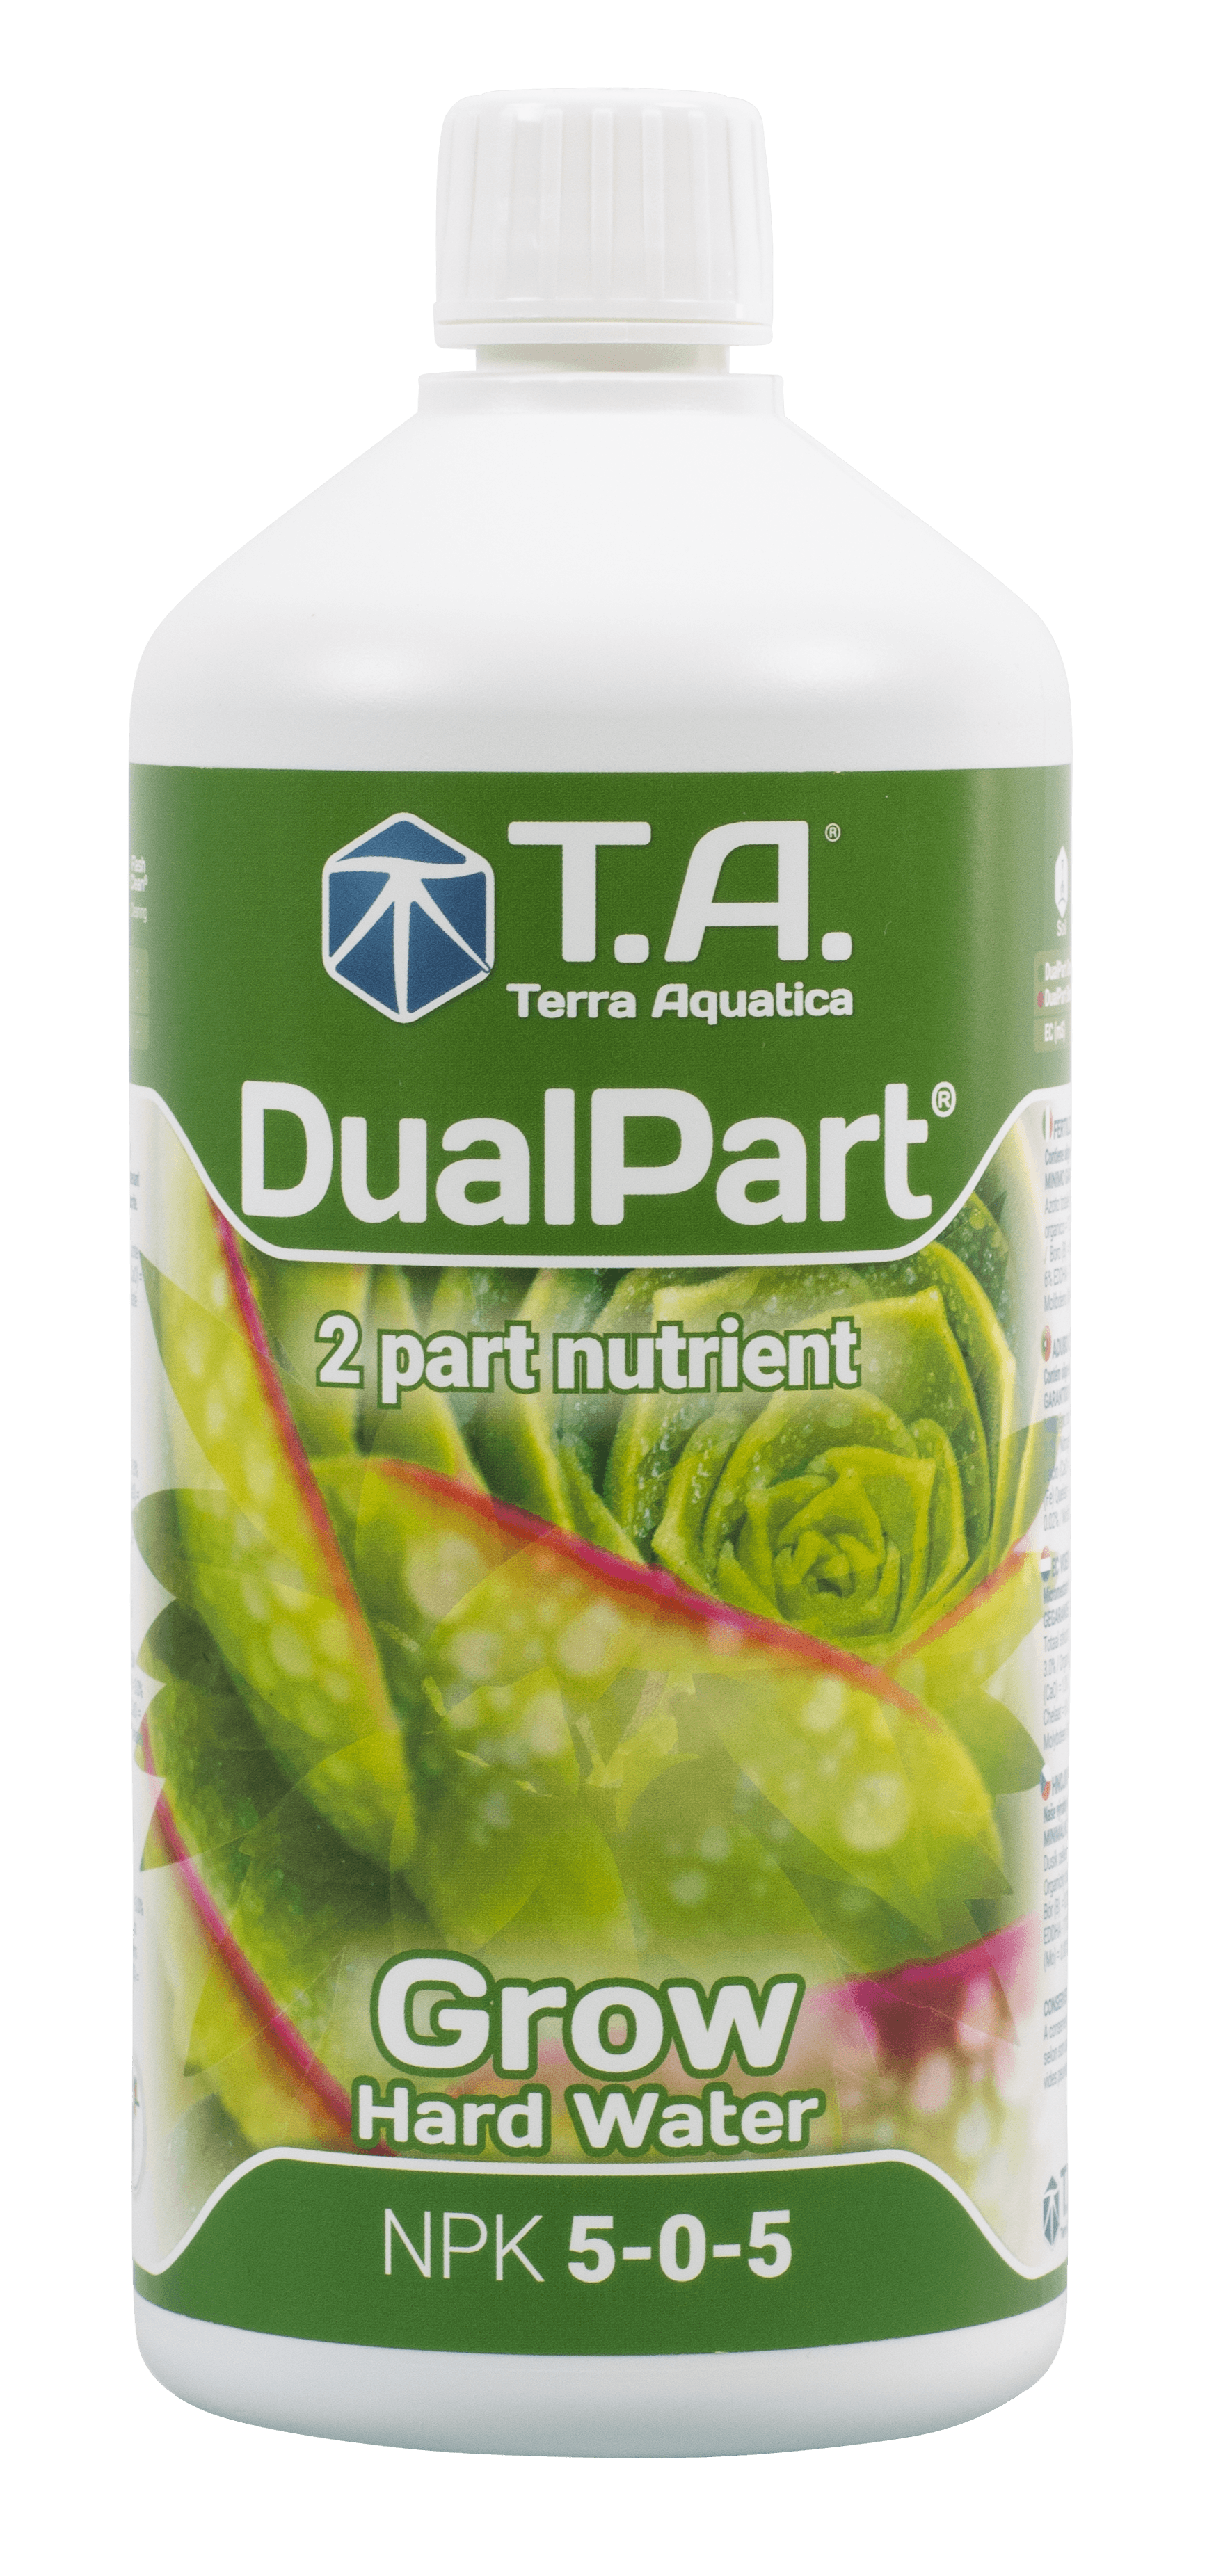 T. A. DualPart Grow HardWater